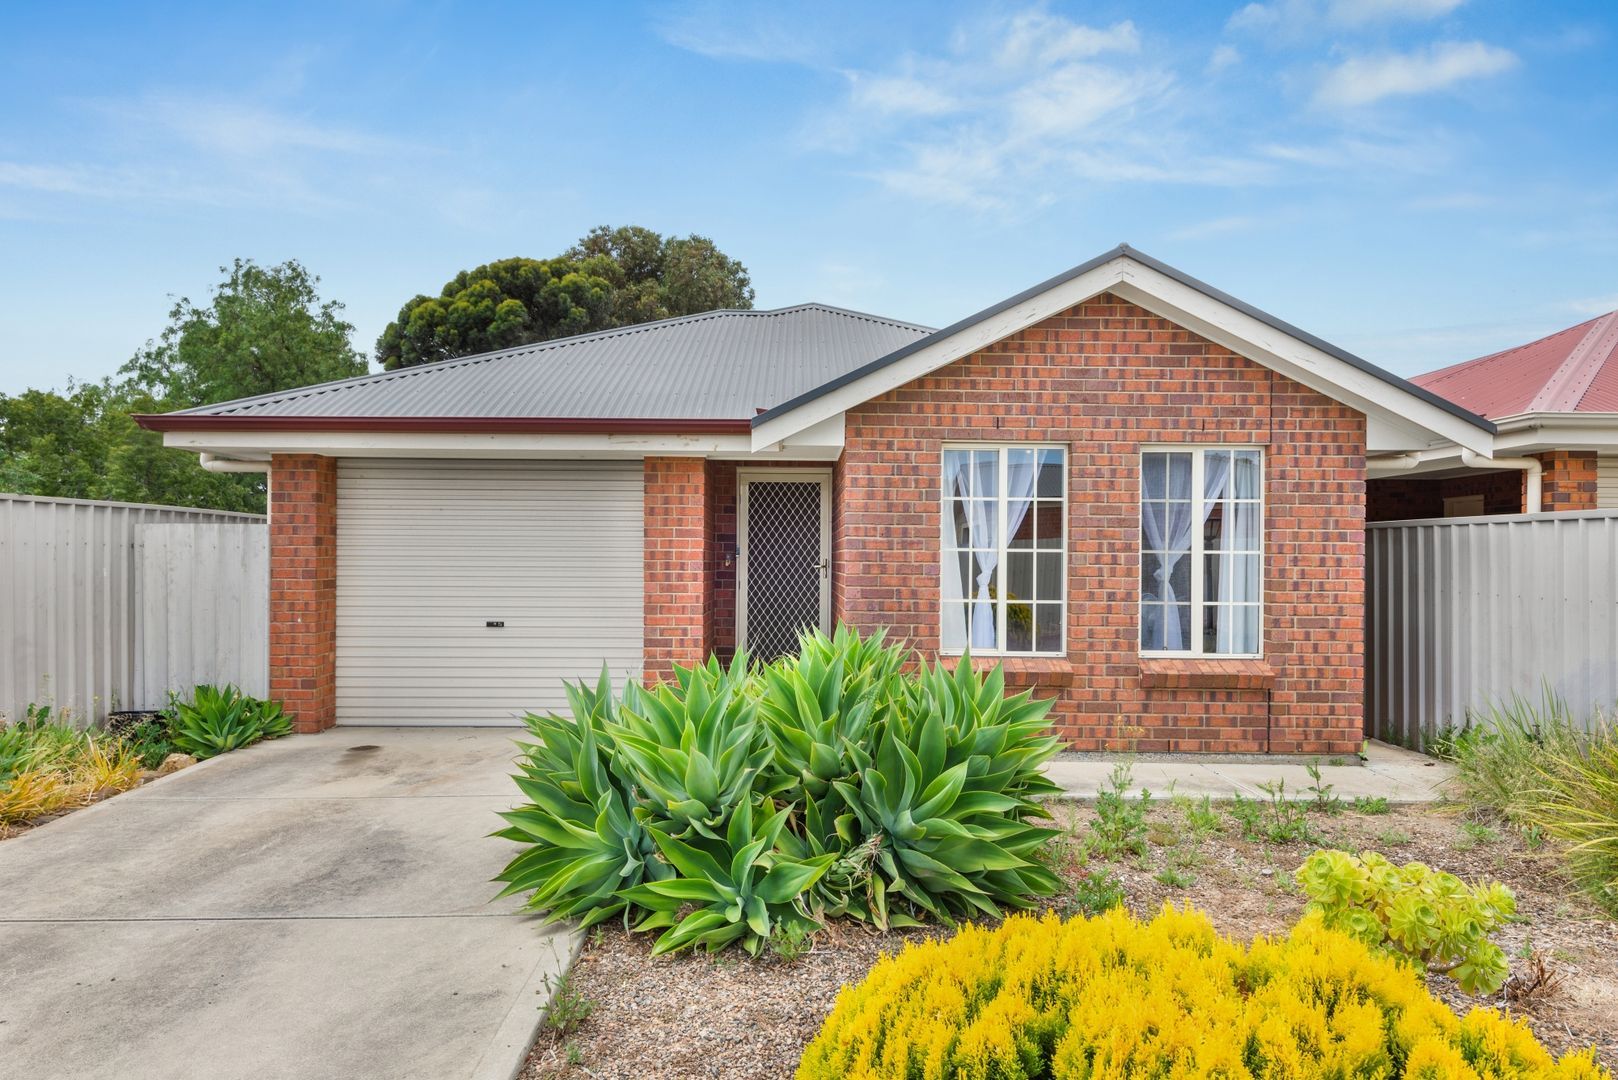 3 bedrooms House in 4/35 Willow Avenue MURRAY BRIDGE SA, 5253